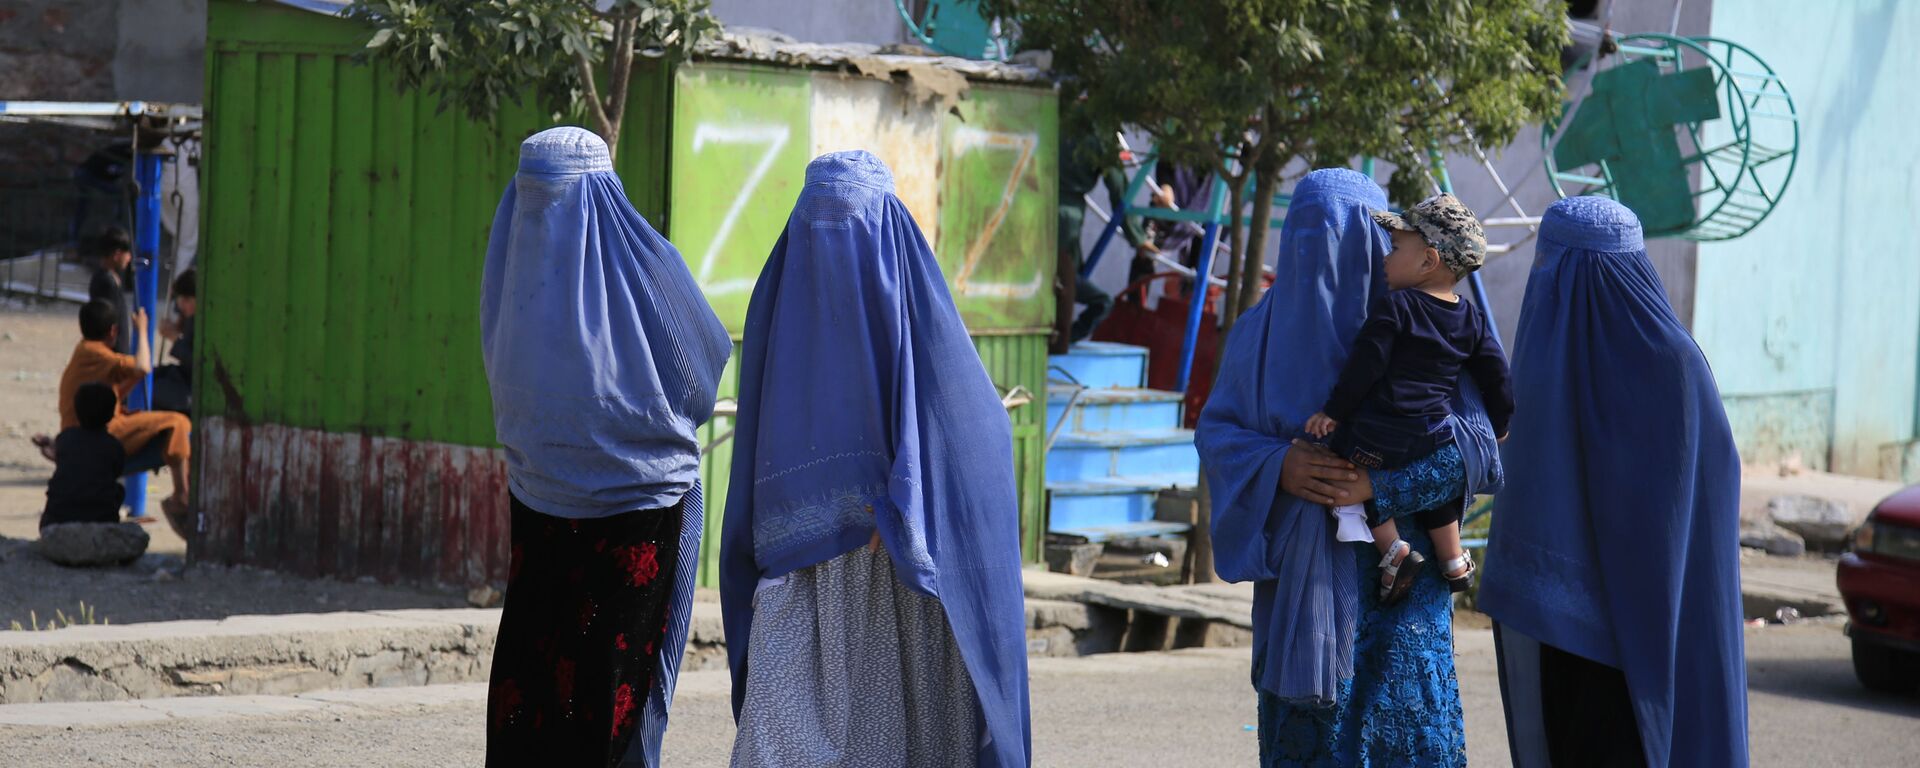 Afghan women walk on the road during the first day of Eid al-Fitr in Kabul, Afghanistan, Thursday, May 13, 2021 - Sputnik International, 1920